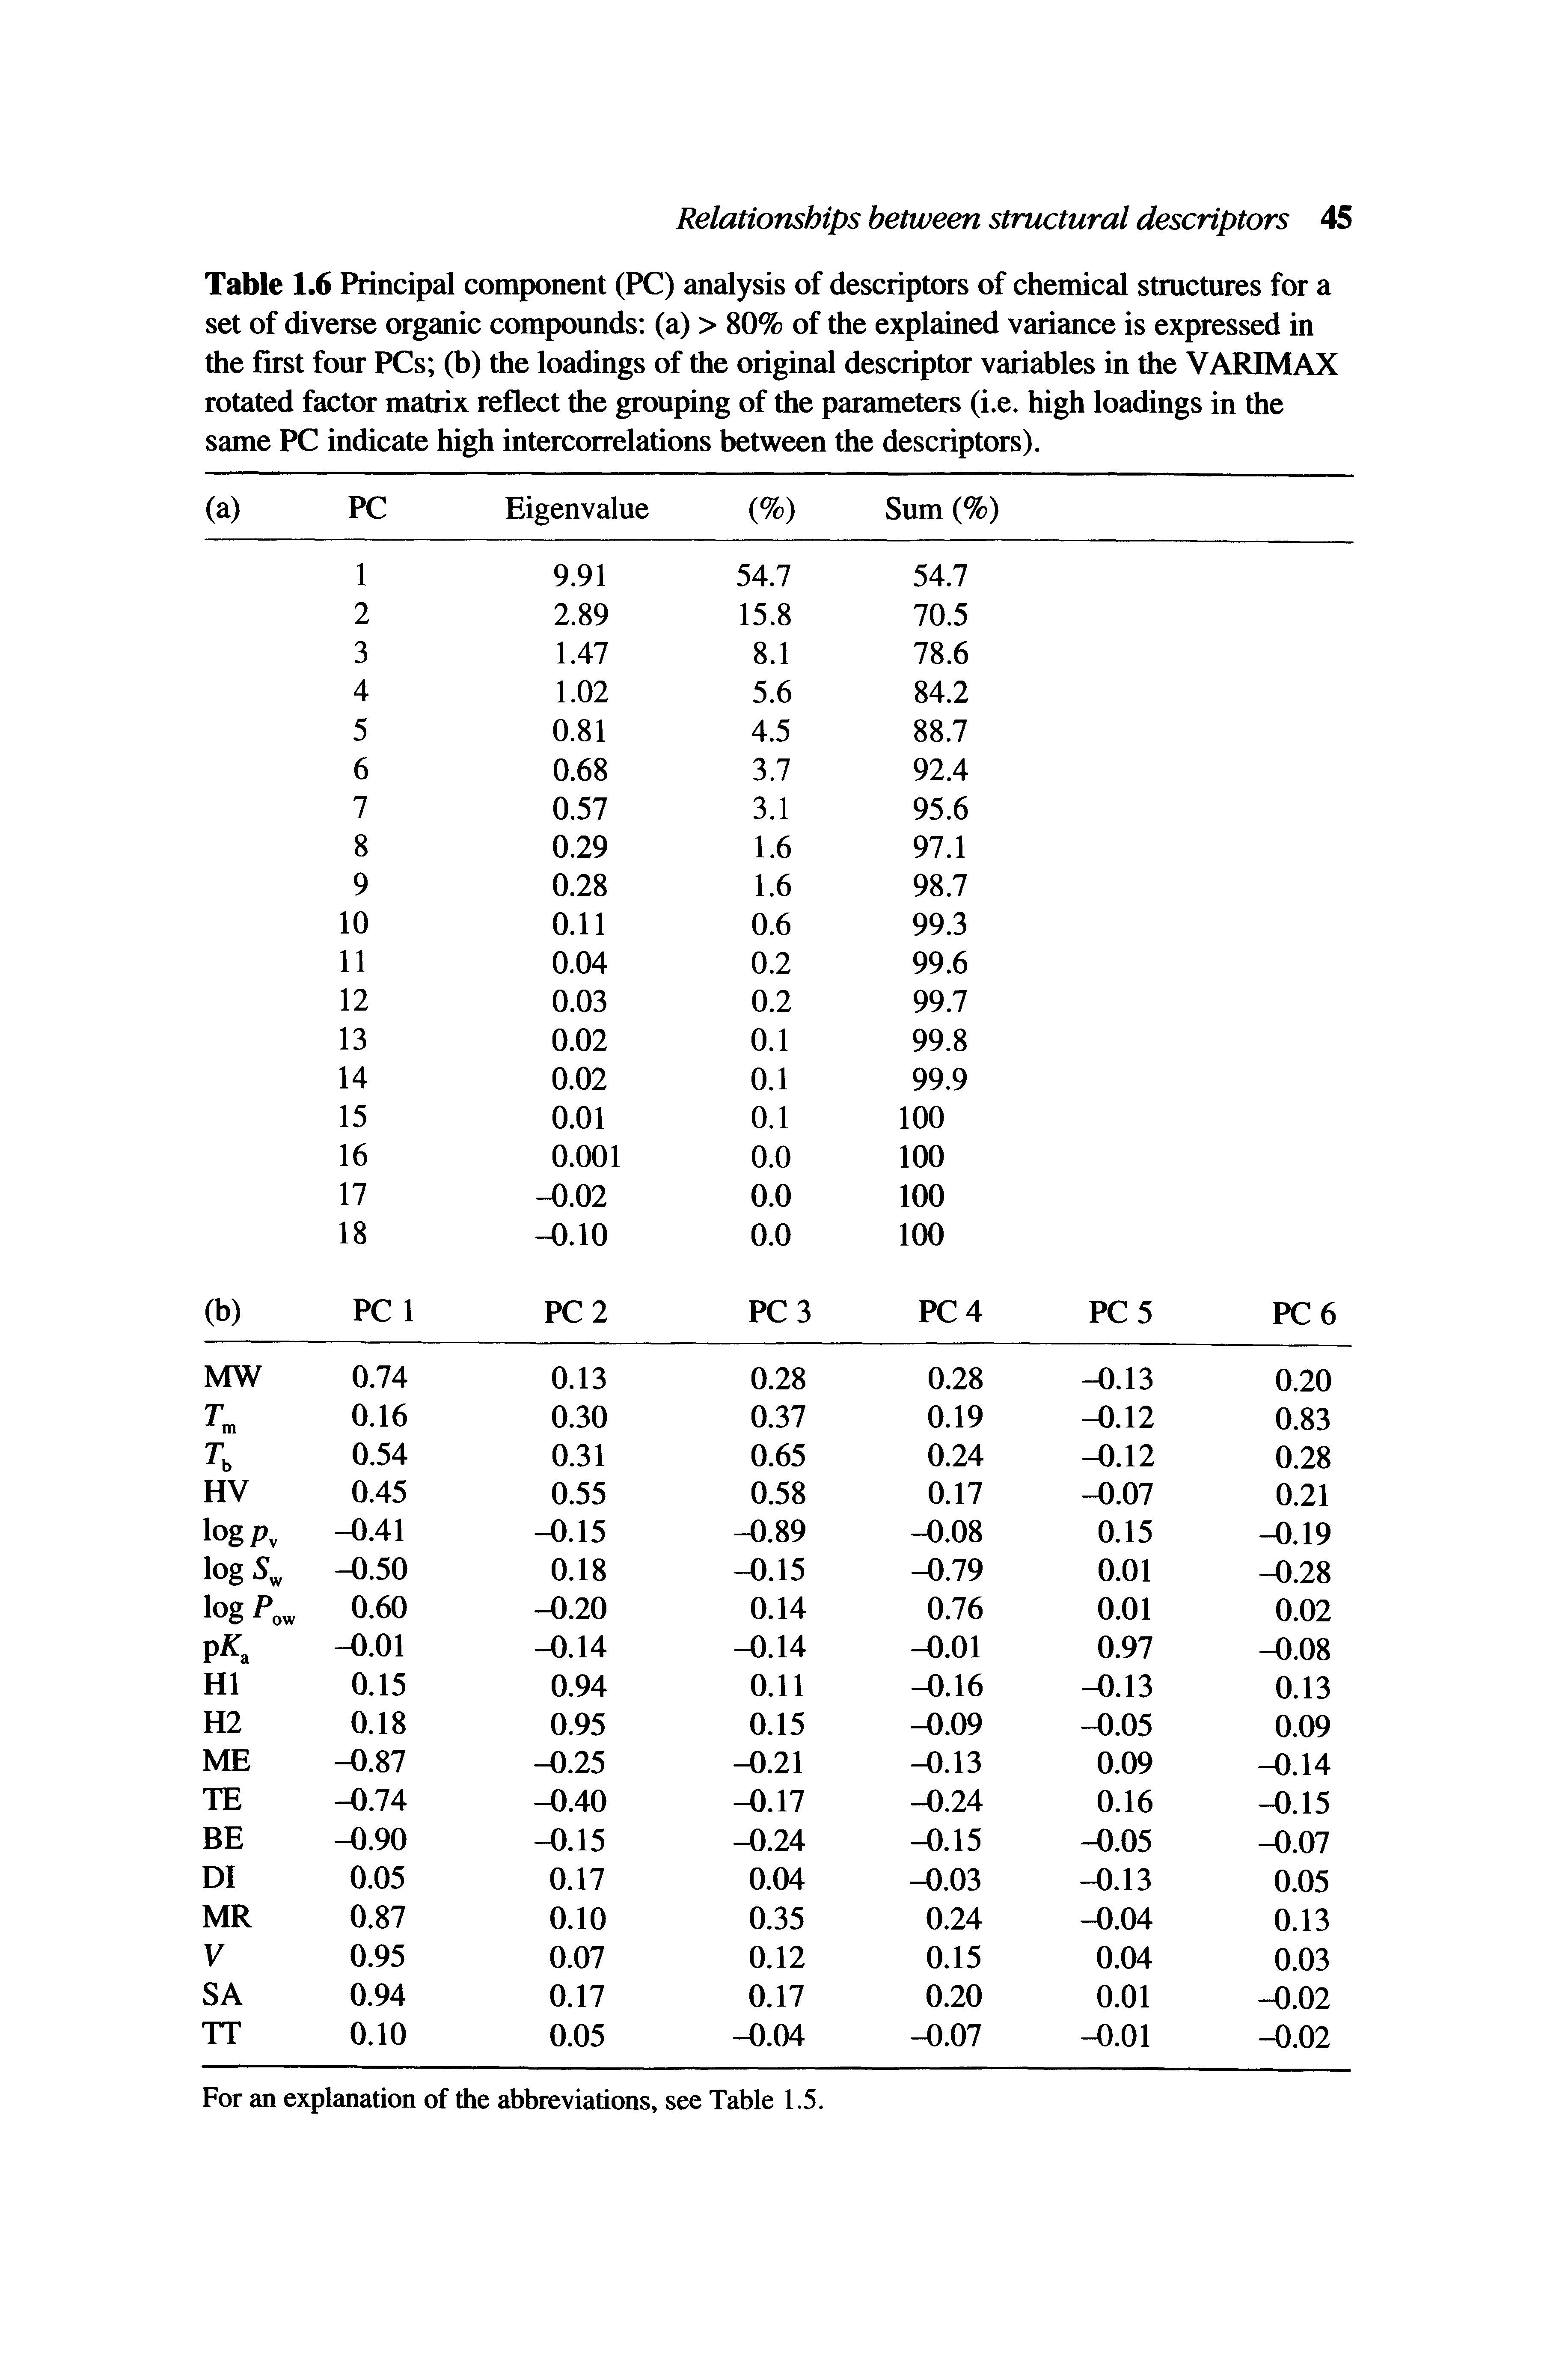 Table 1.6 Principal component (PC) analysis of descriptors of chemical structures for a set of diverse organic compounds (a) > 80% of the explained variance is expressed in the first four PCs (b) the loadings of the original descriptor variables in the VARIMAX rotated factor matrix reflect the grouping of the parameters (i.e. high loadings in the same PC indicate high intercorrelations between the descriptors).